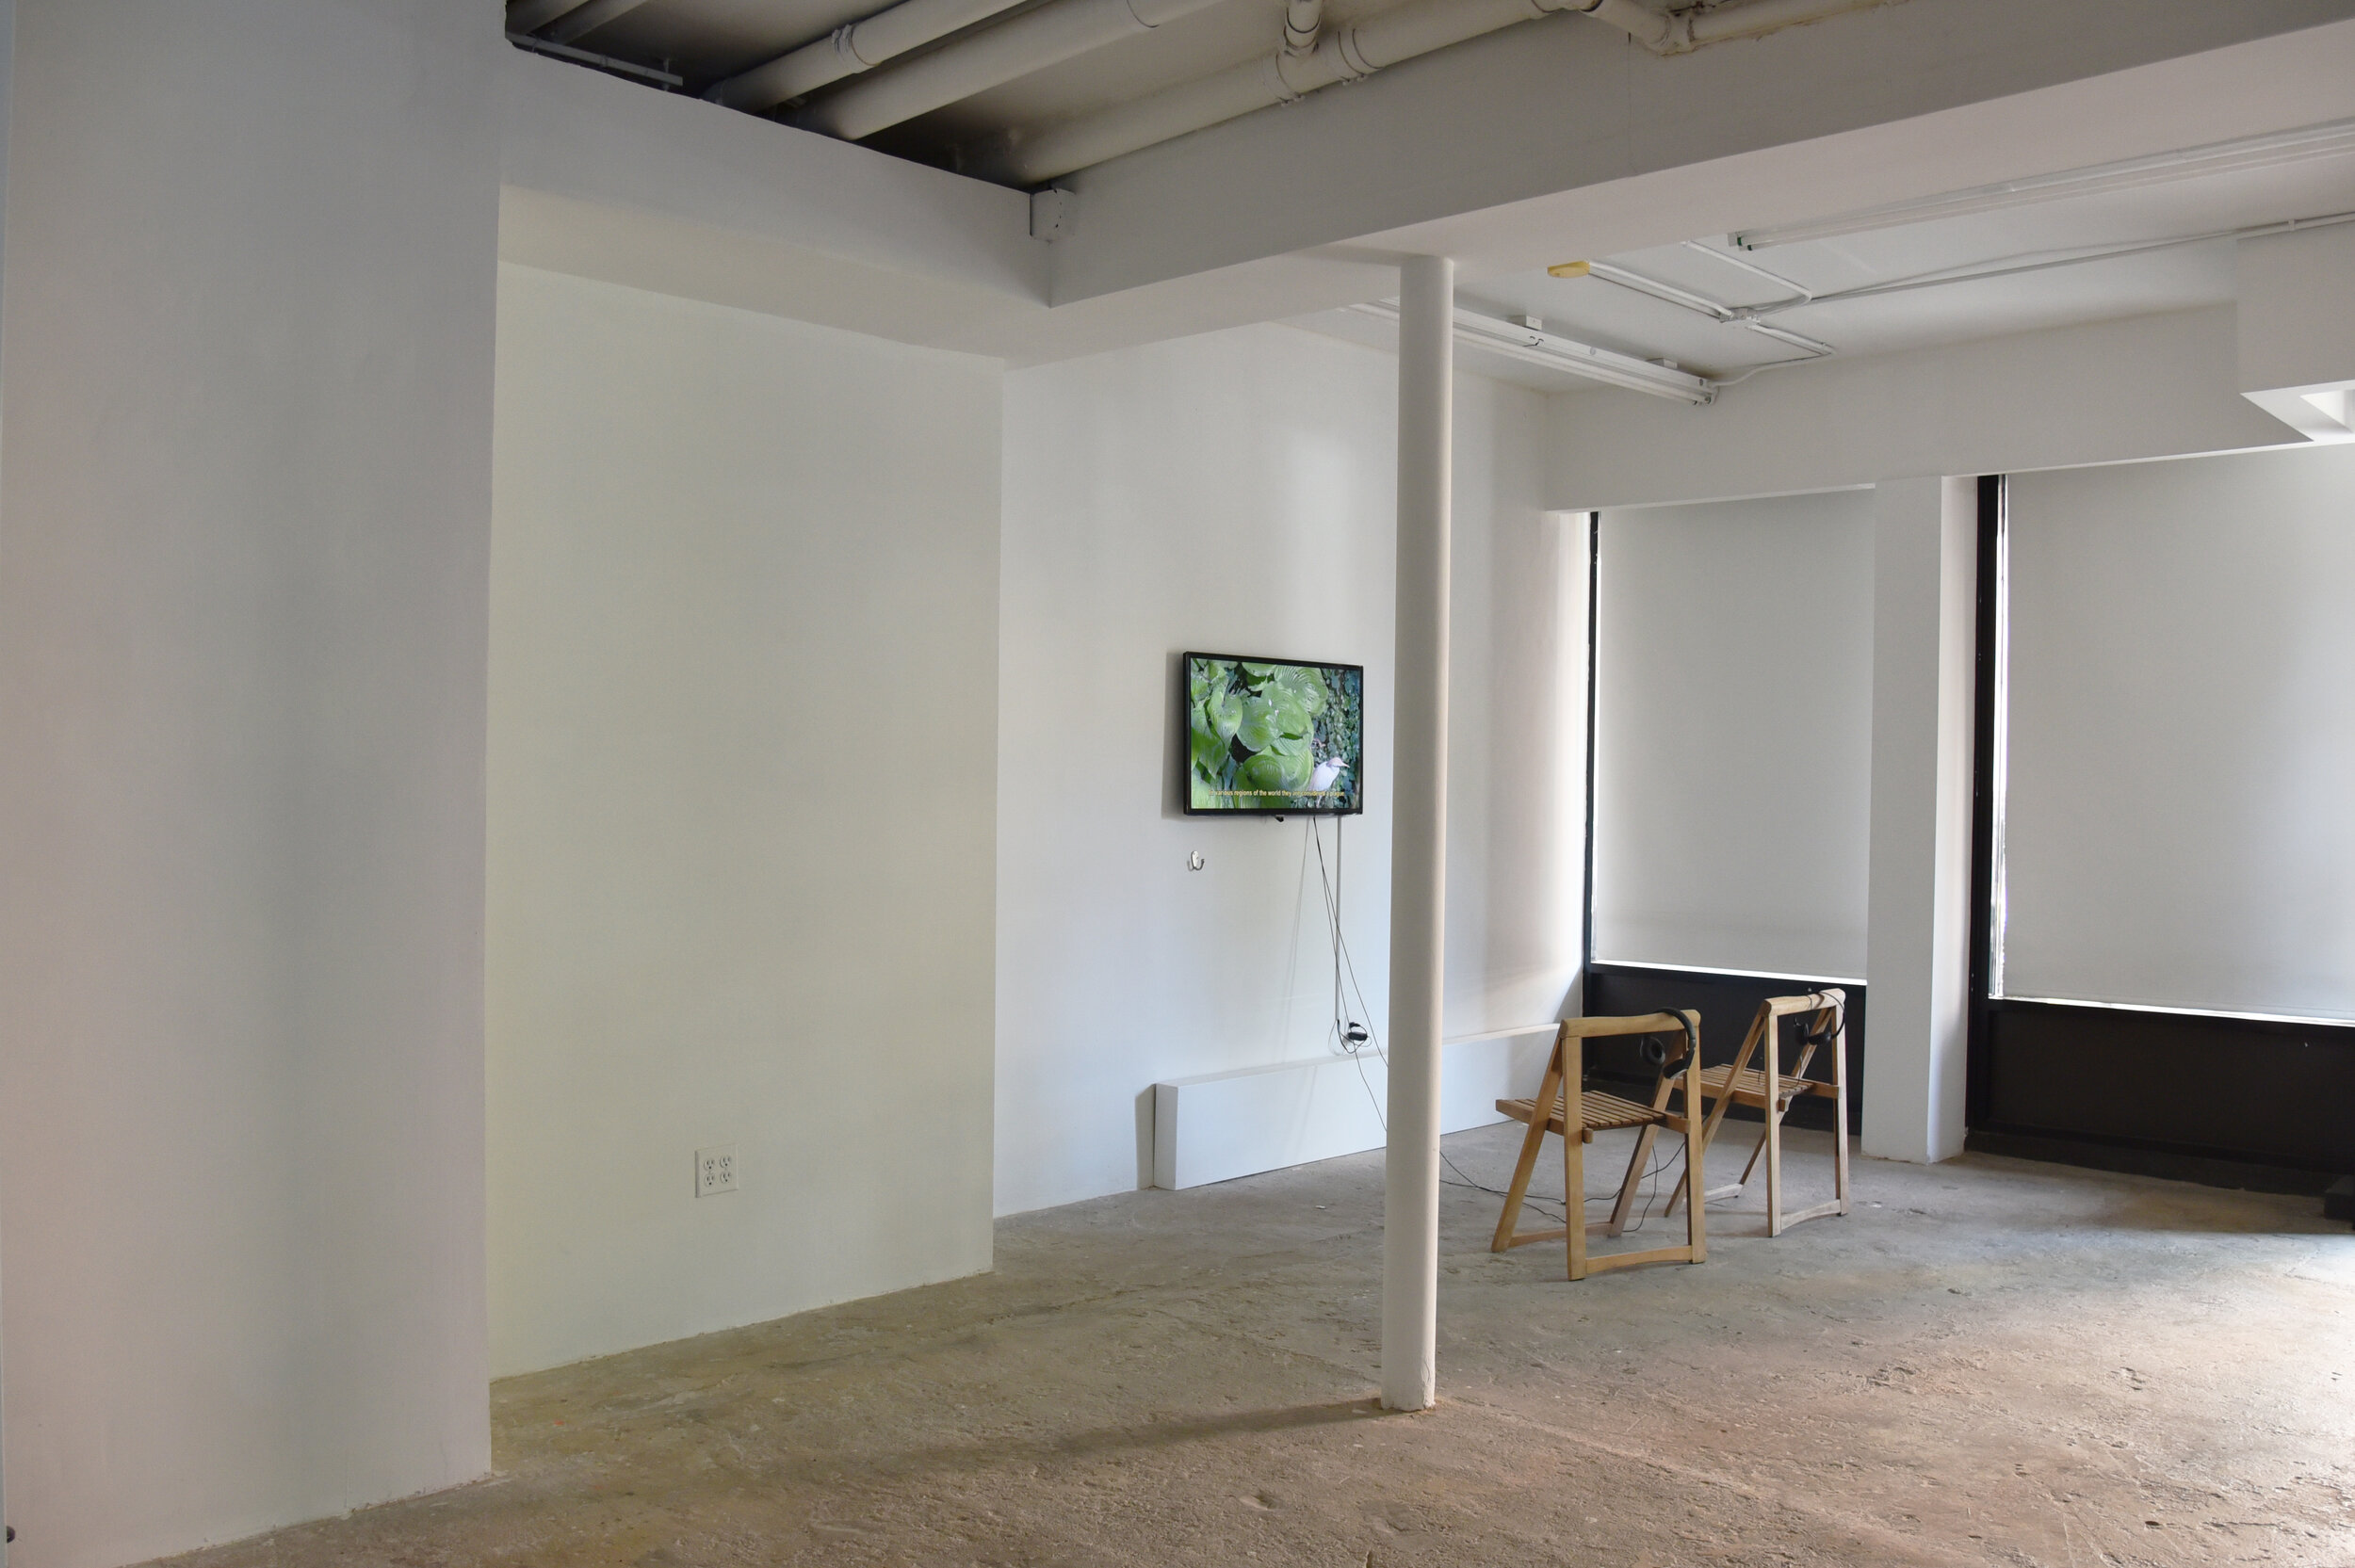 Installation images of AFTER NATURE, featuring works by Rocío Olivares &amp; Nicolás Rupcich at Cindy Rucker Gallery